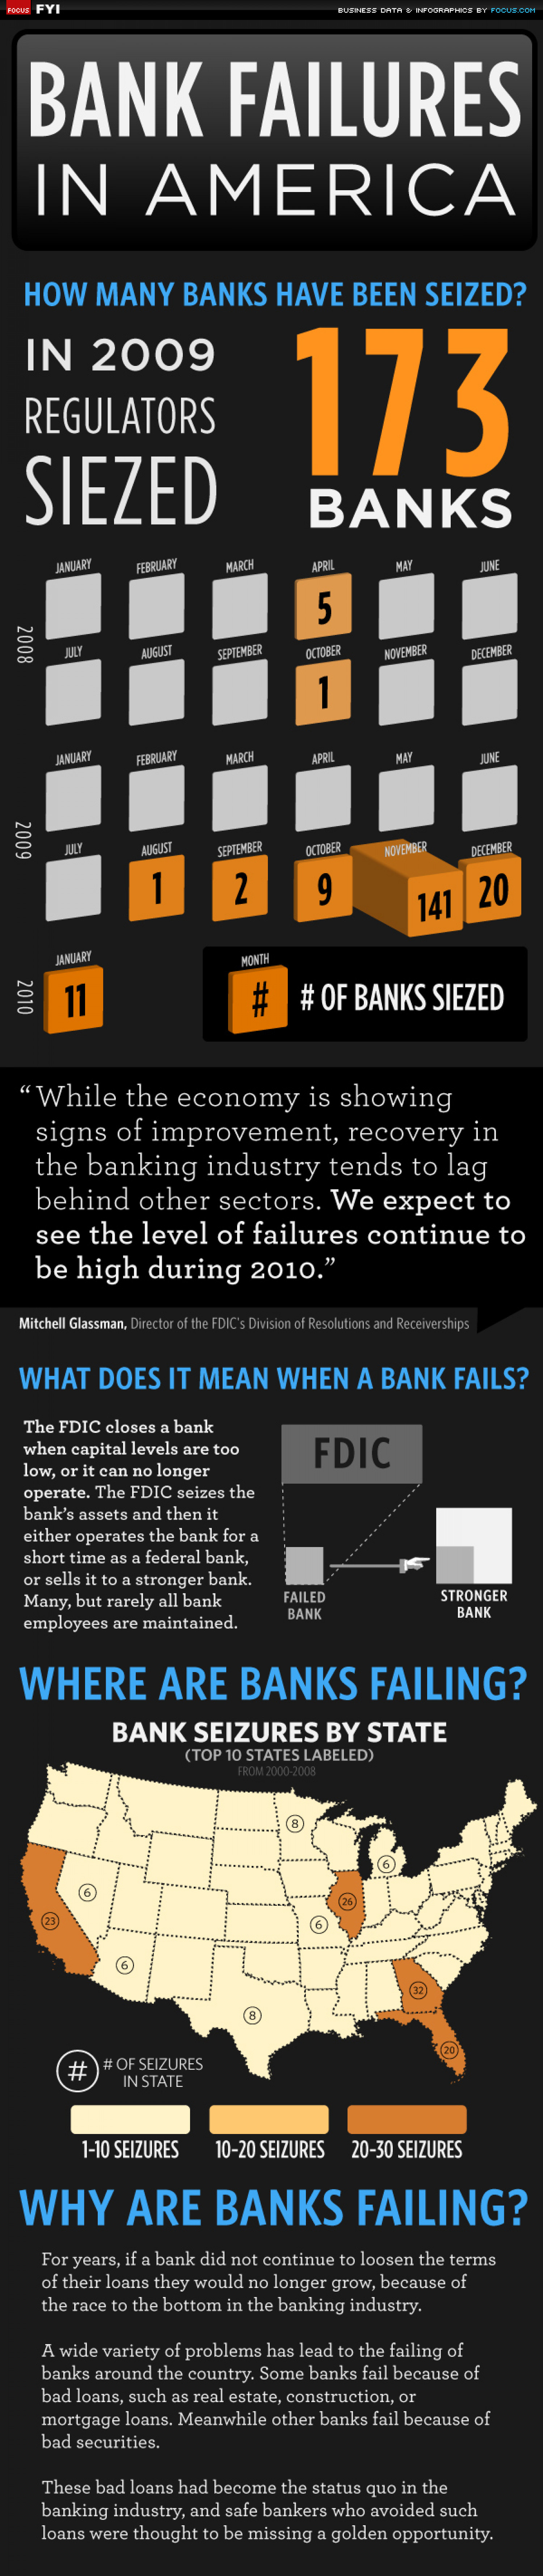 Bank Failures in America Infographic